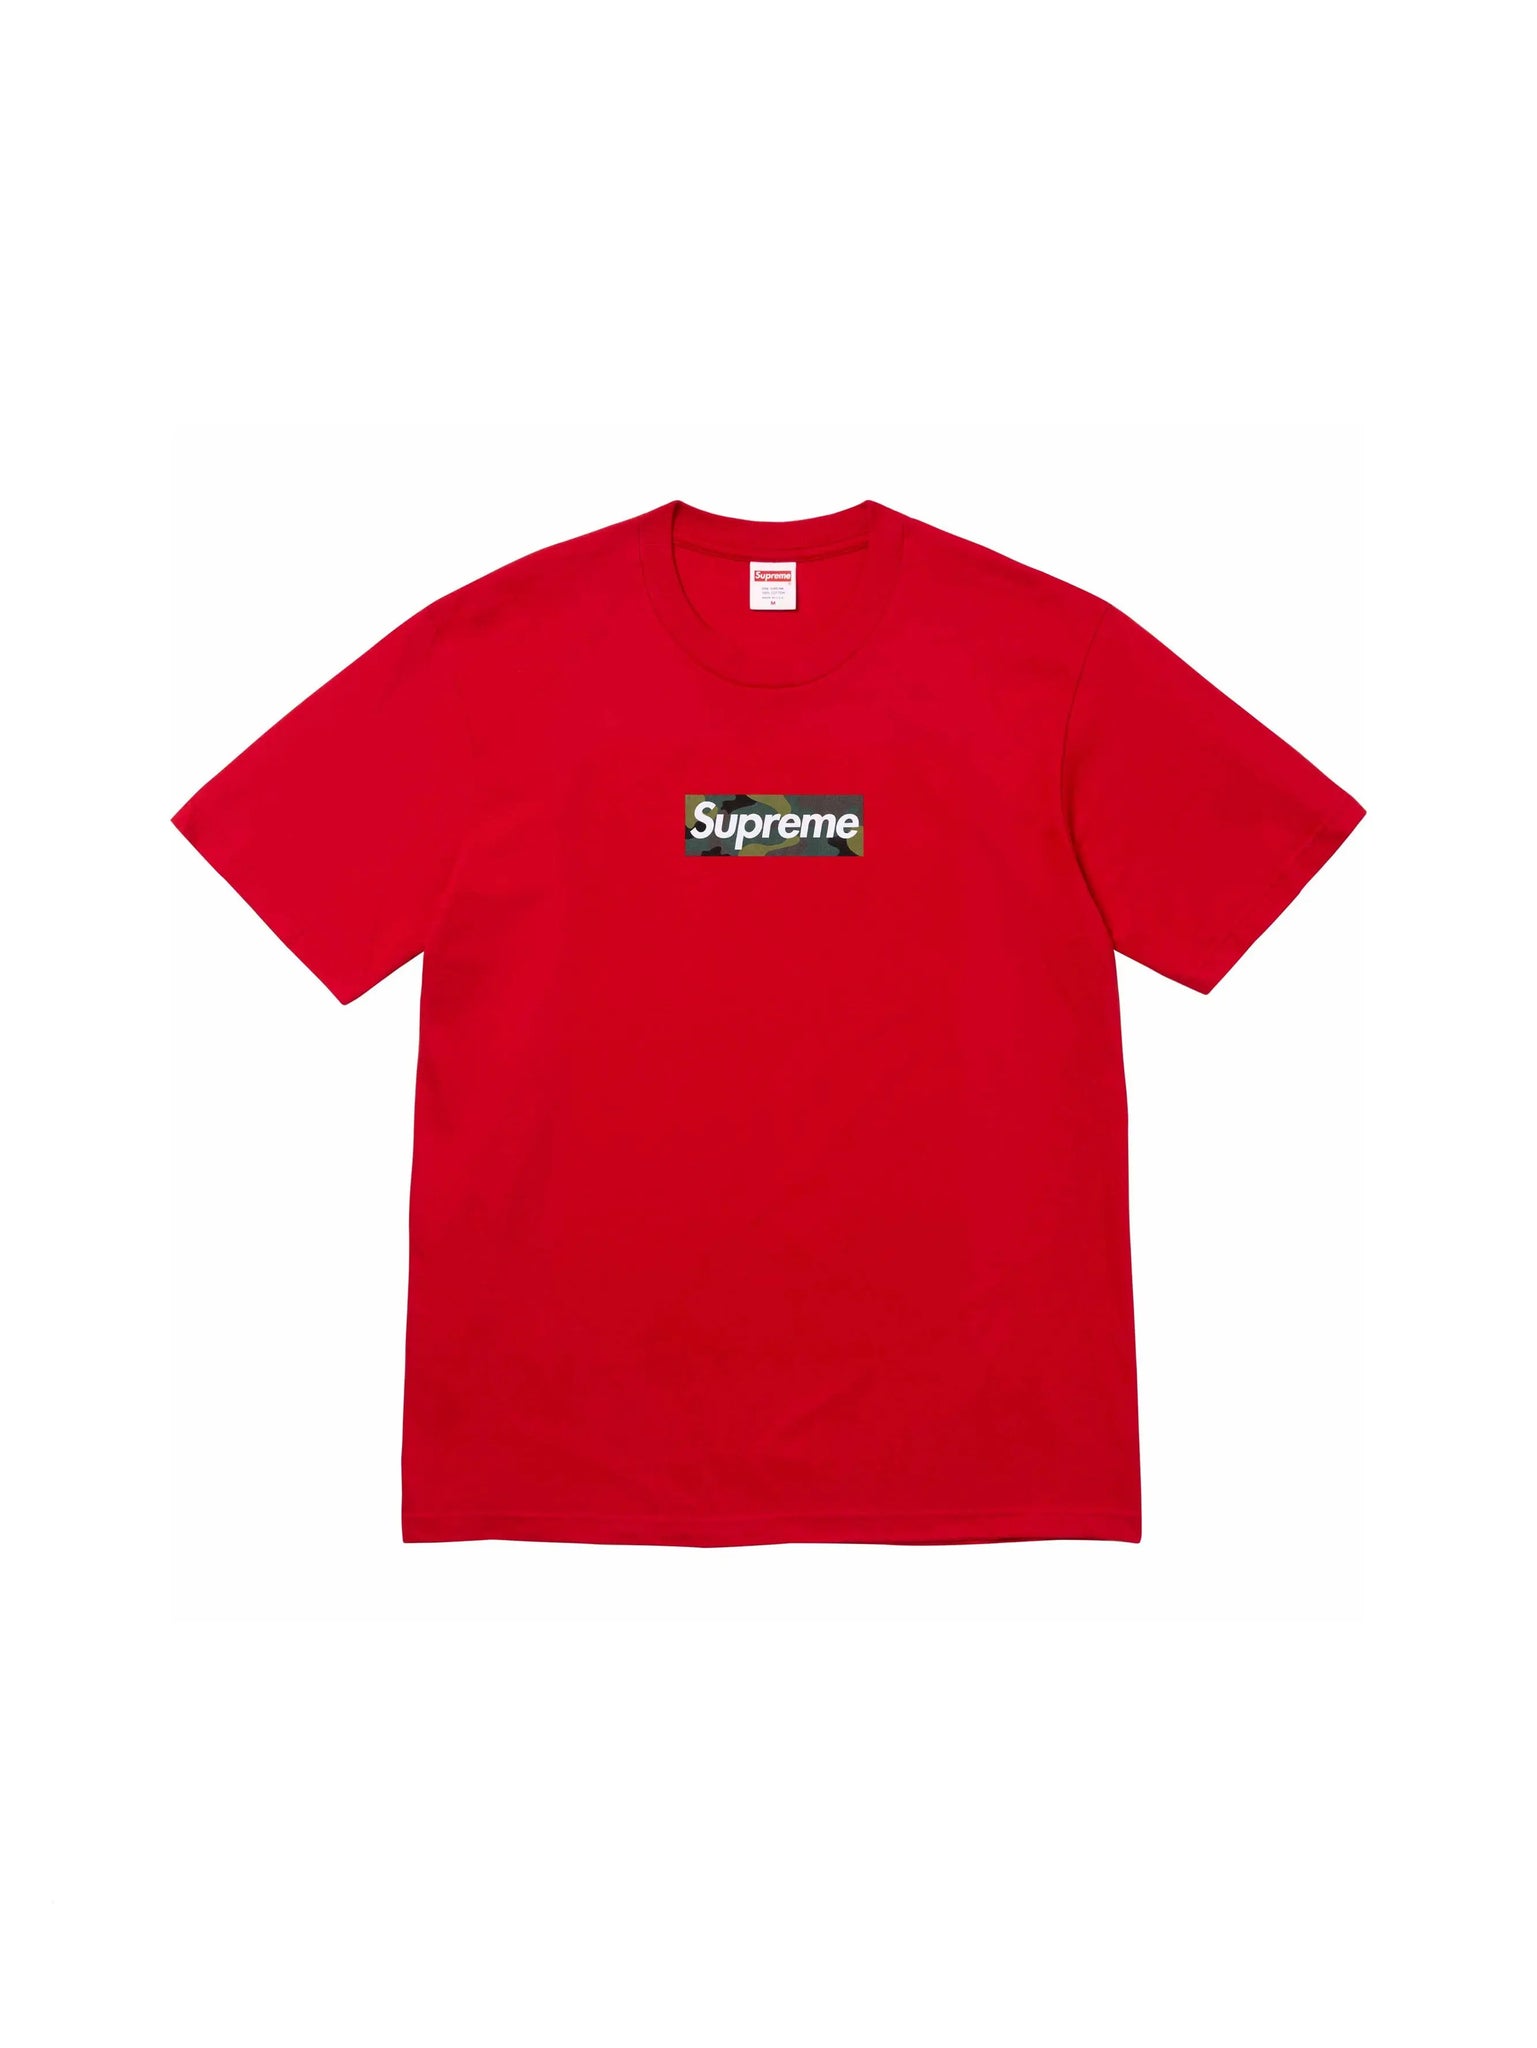 Supreme Box Logo Tee (FW23) Red in Auckland, New Zealand - Shop name